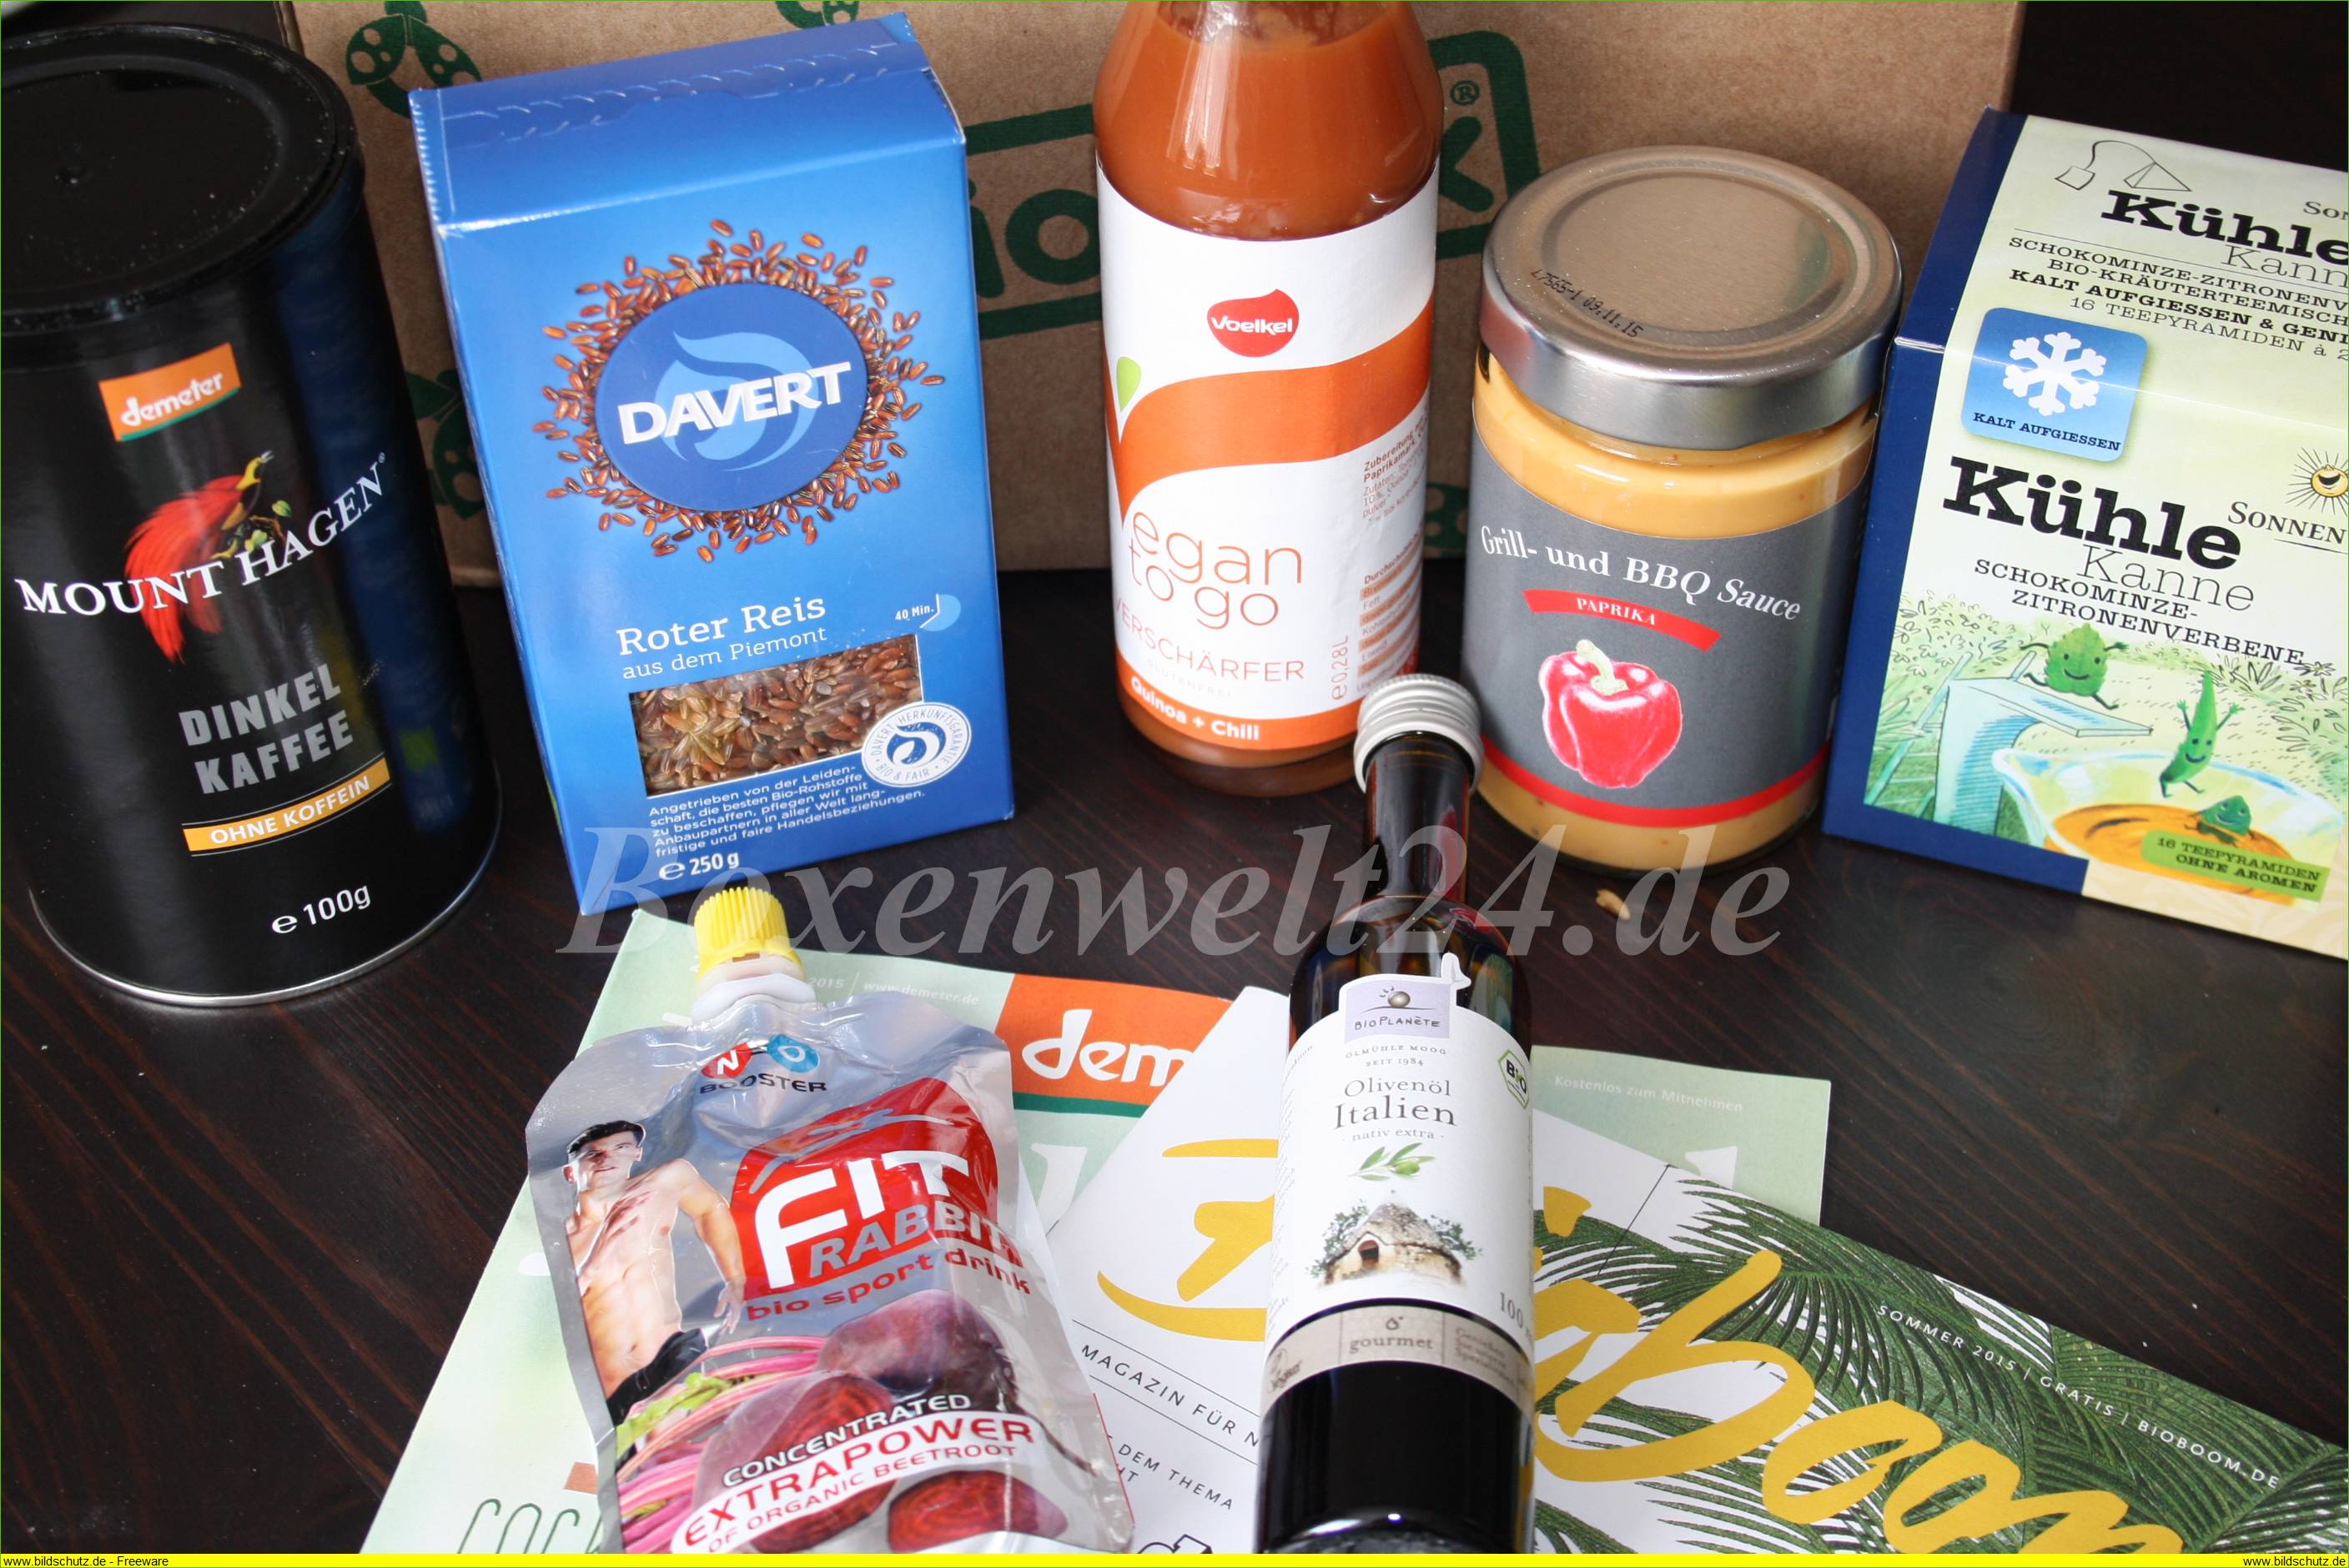 BioBox food and Drink